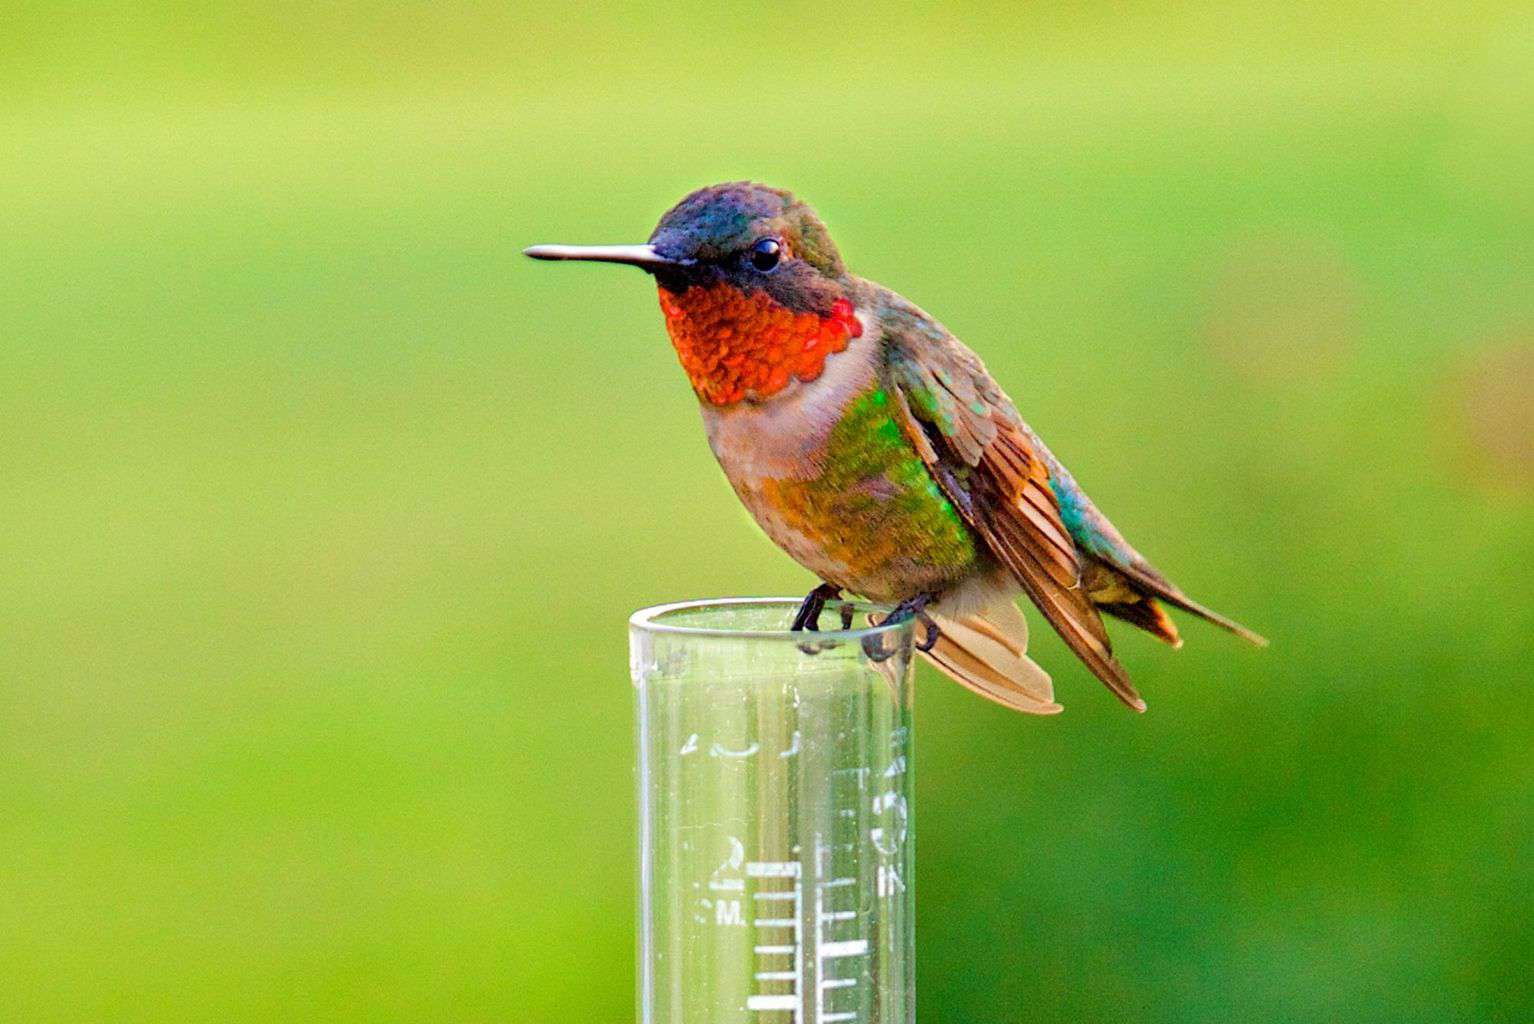 When Do Hummingbirds Arrive In And Leave Tennessee